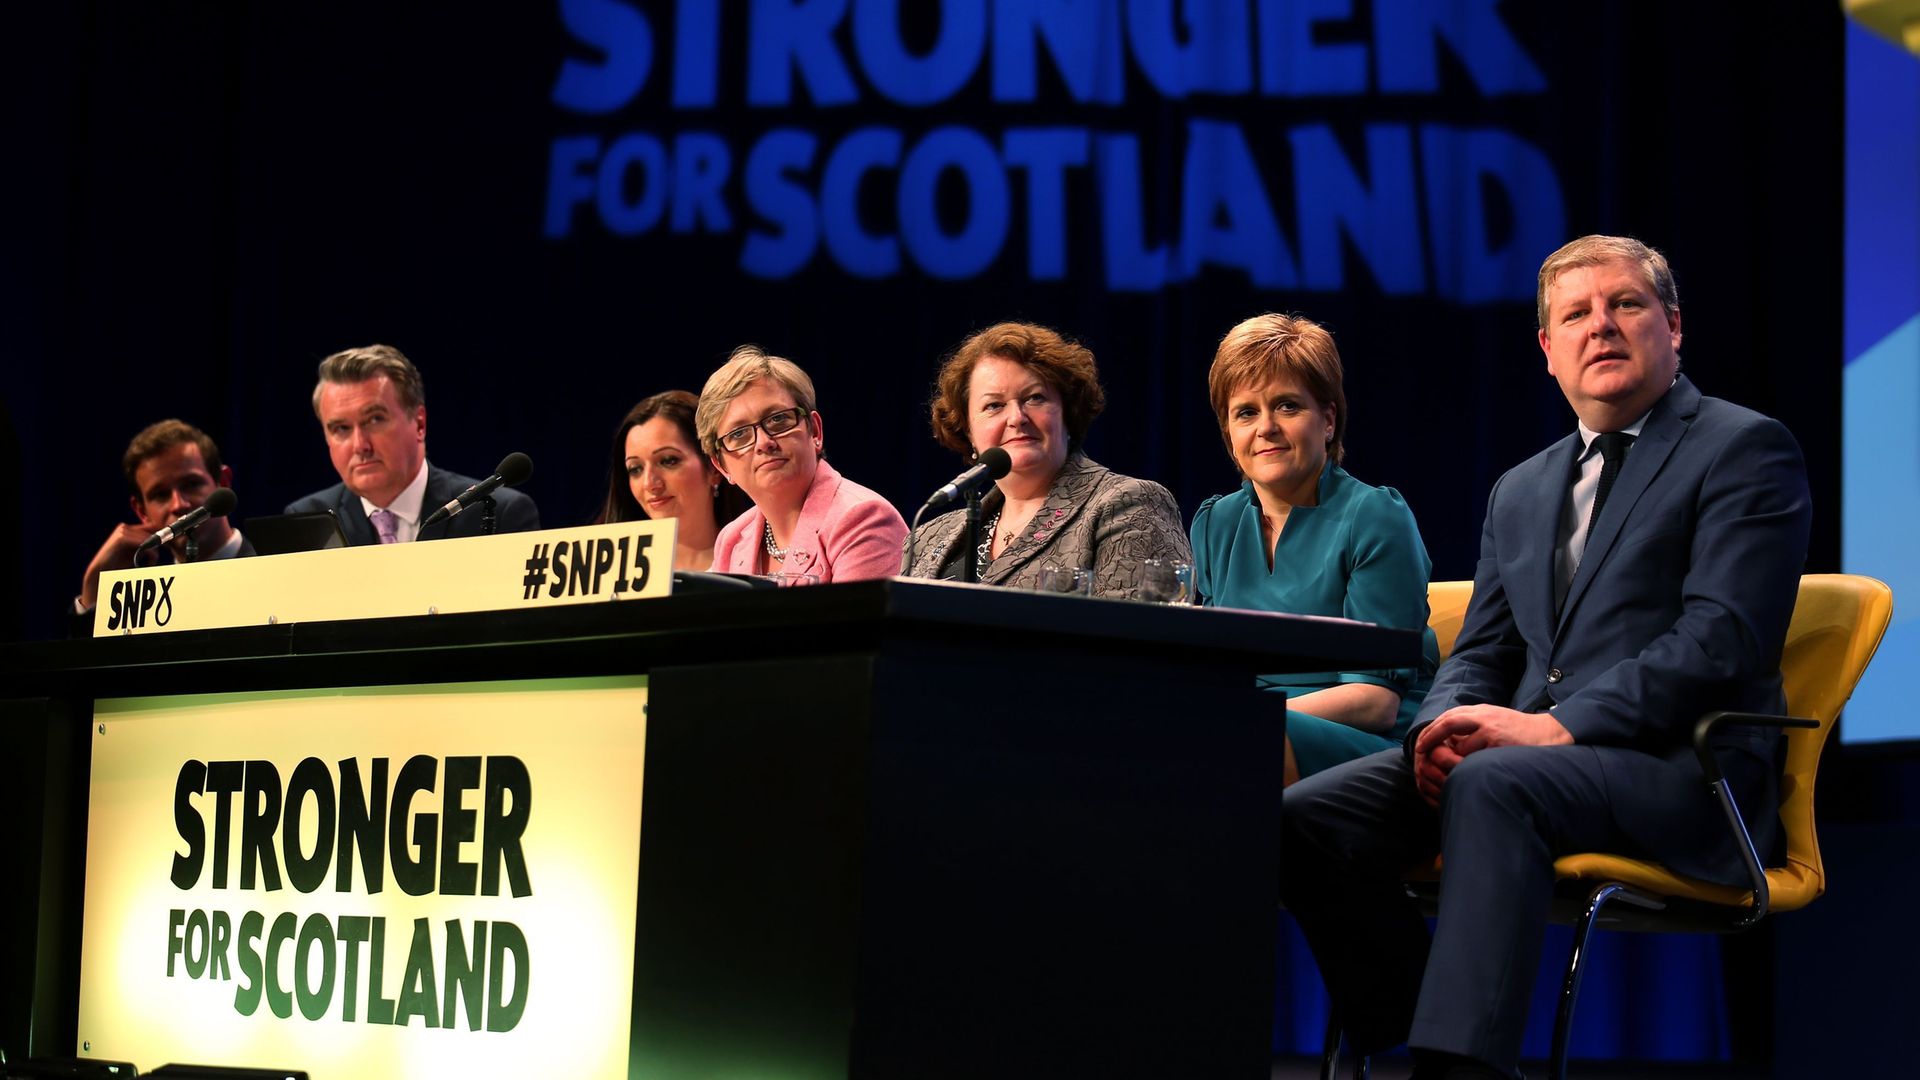 Nicola Sturgeon on a panel at an SNP conference - Credit: PA